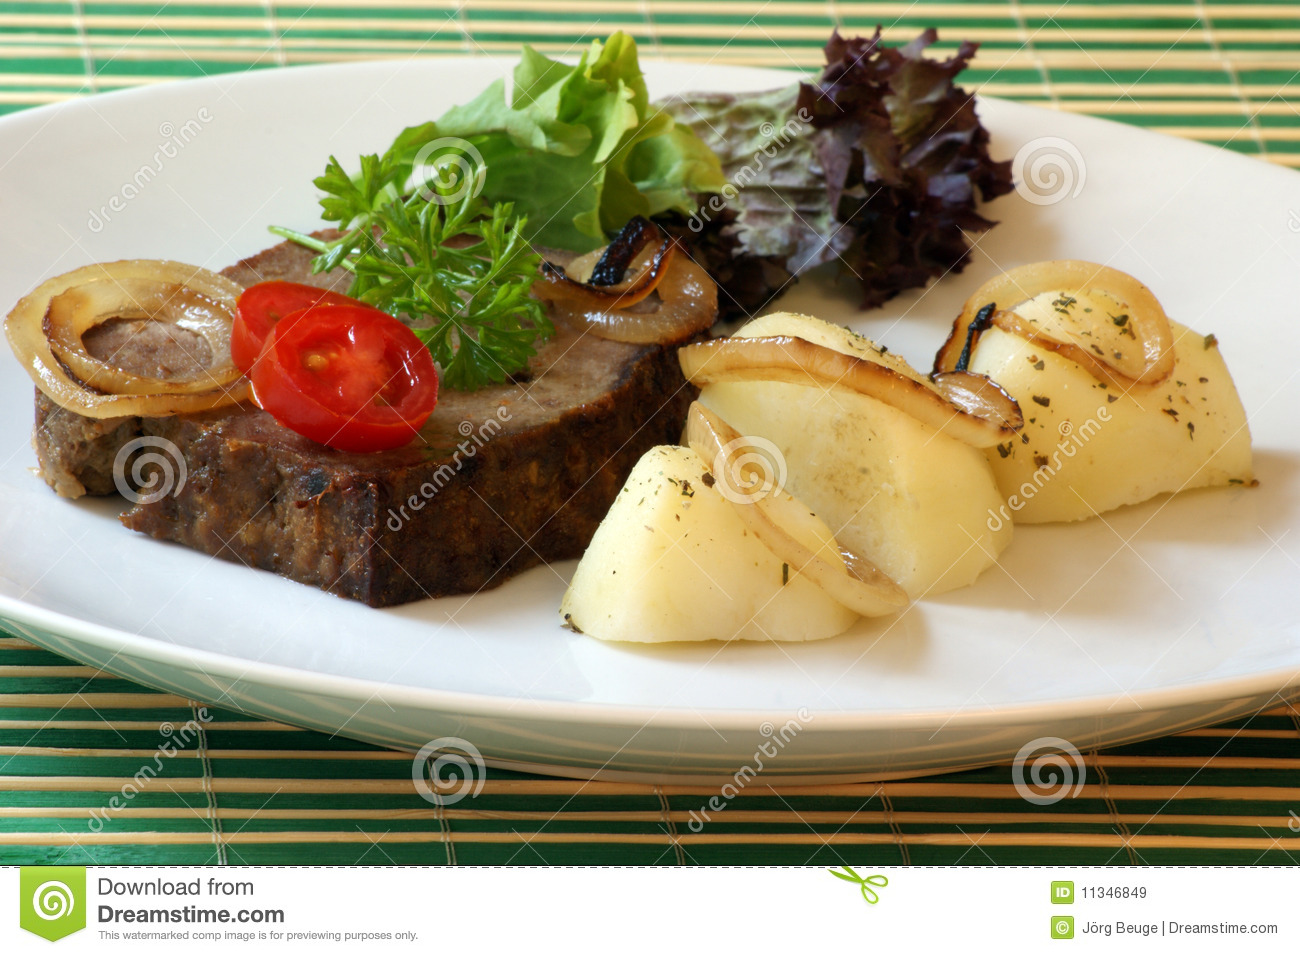 Sliced Meat Loaf With Vegetable On A Plate Royalty Free Stock Images